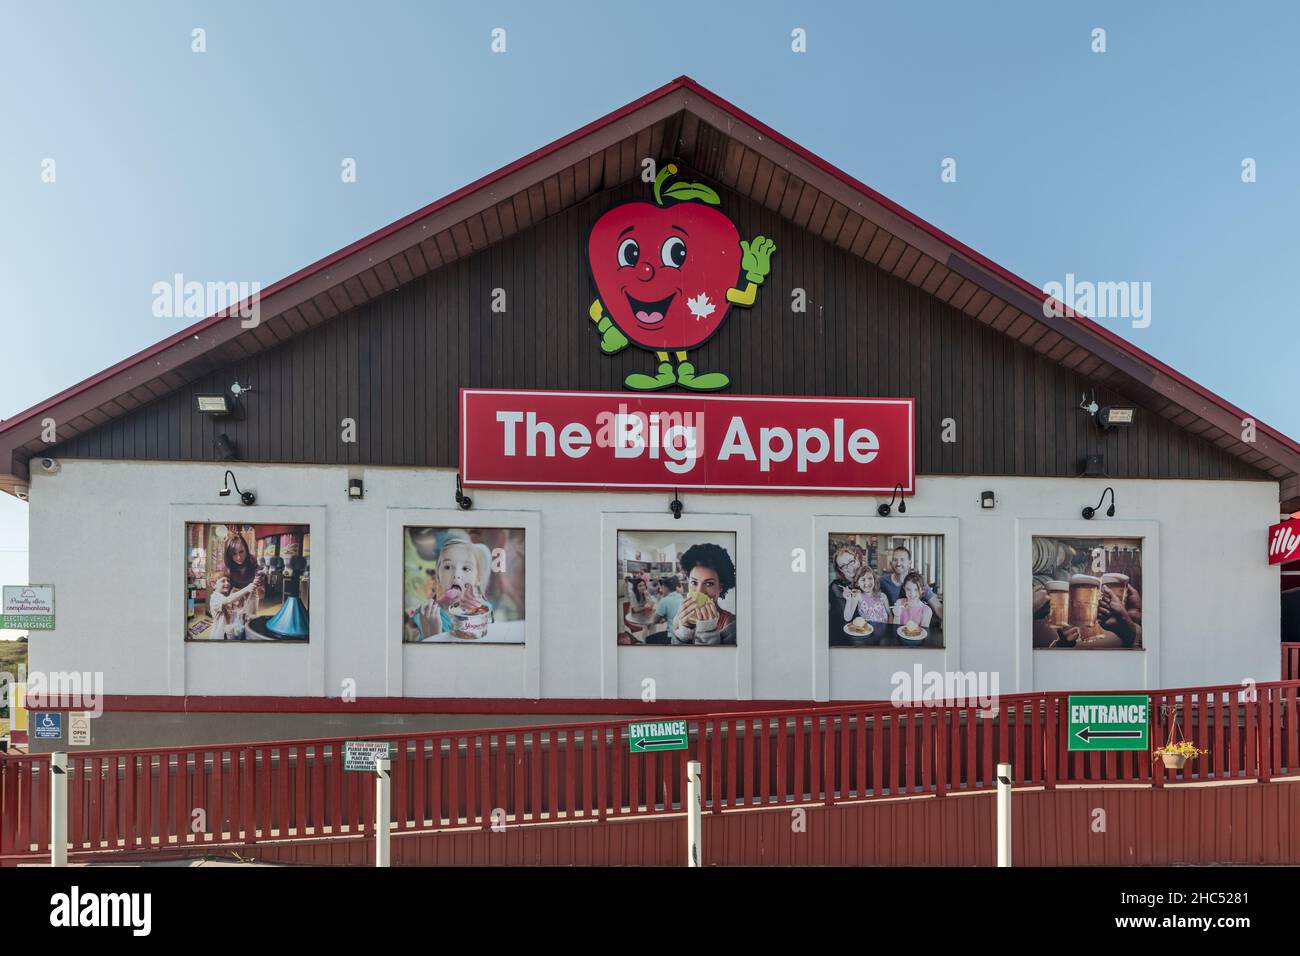 Colborne, Canada - Sept 7, 2021: Big apple the roadside attraction in Colborne, Ontario, located on South side of Ontario Highway 401. Large apple str Stock Photo